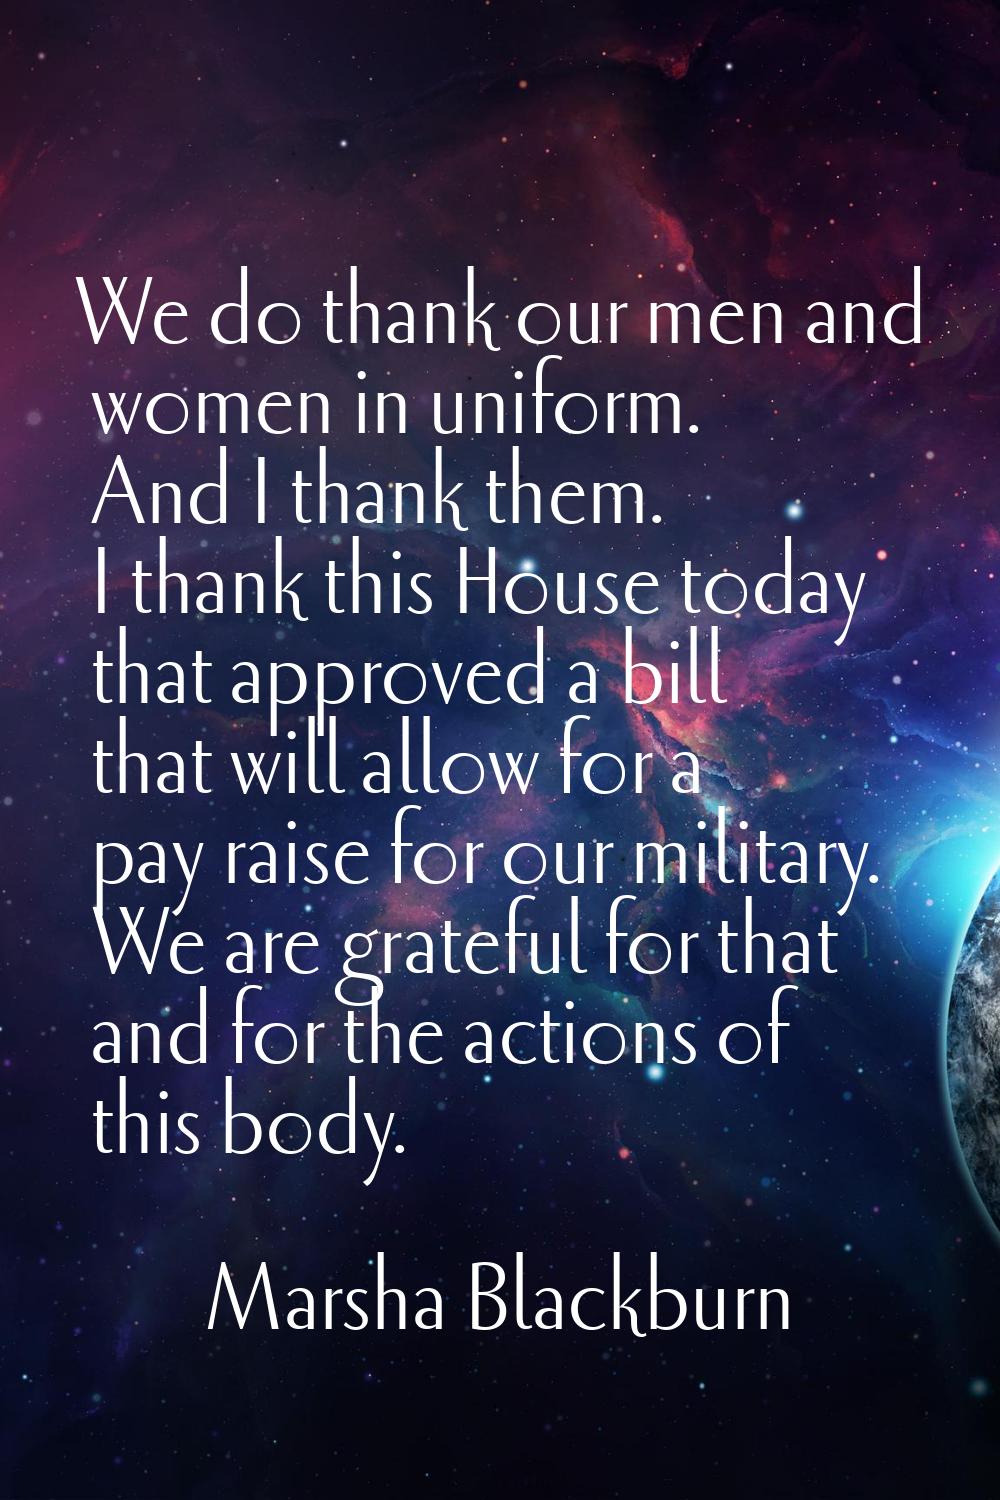 We do thank our men and women in uniform. And I thank them. I thank this House today that approved 